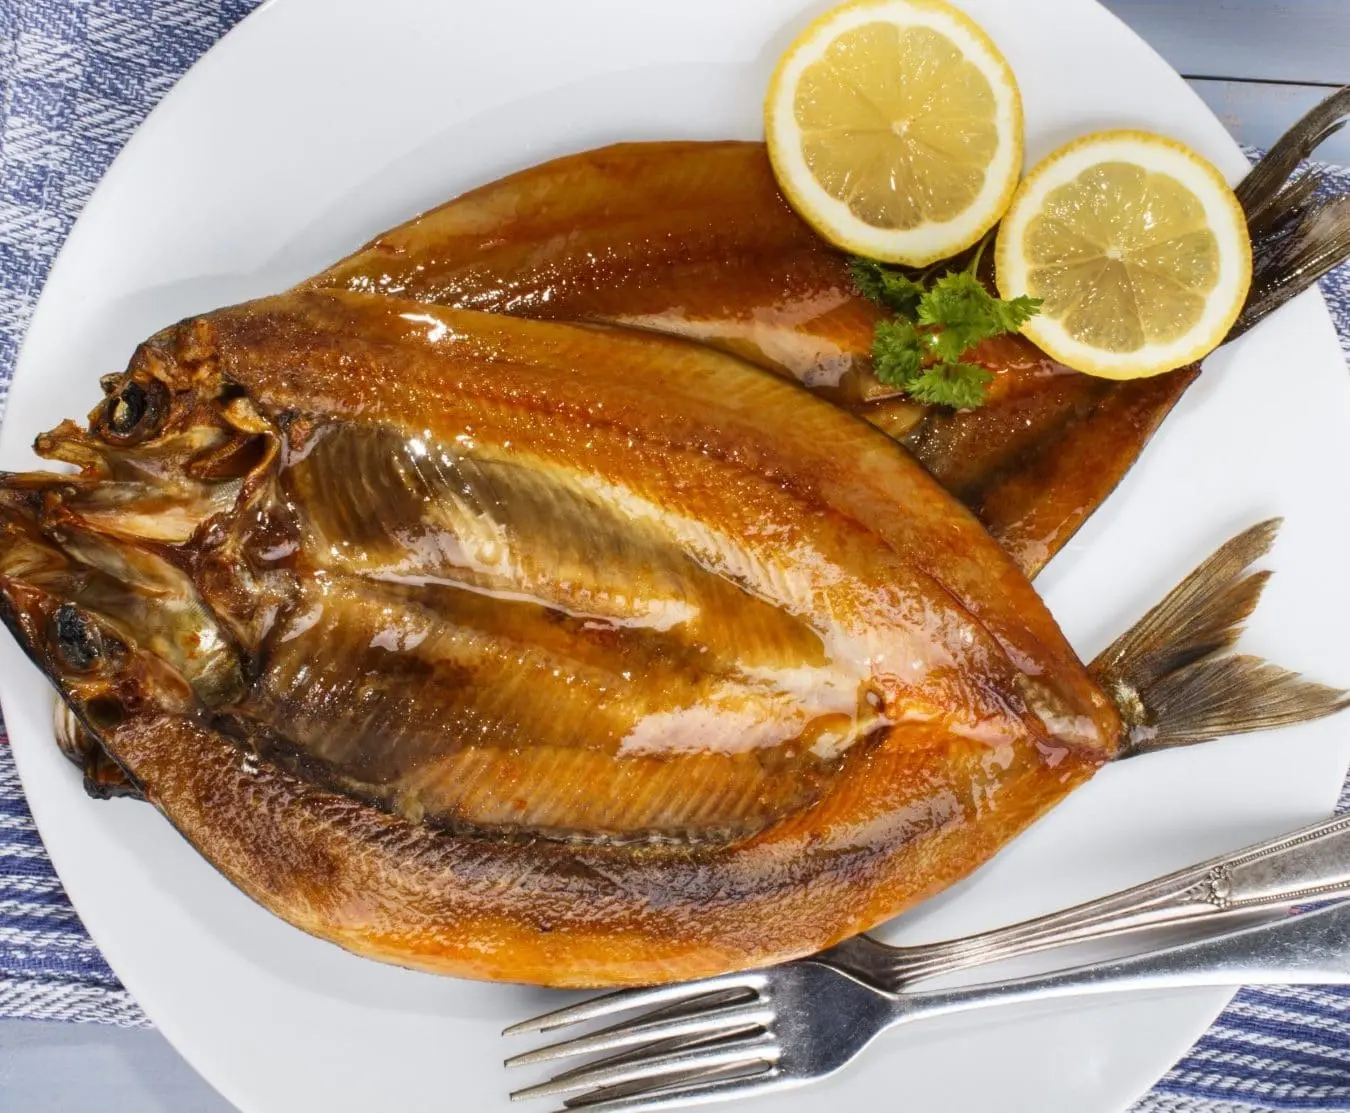 buy smoked kippers online - Can you buy kippers in UK